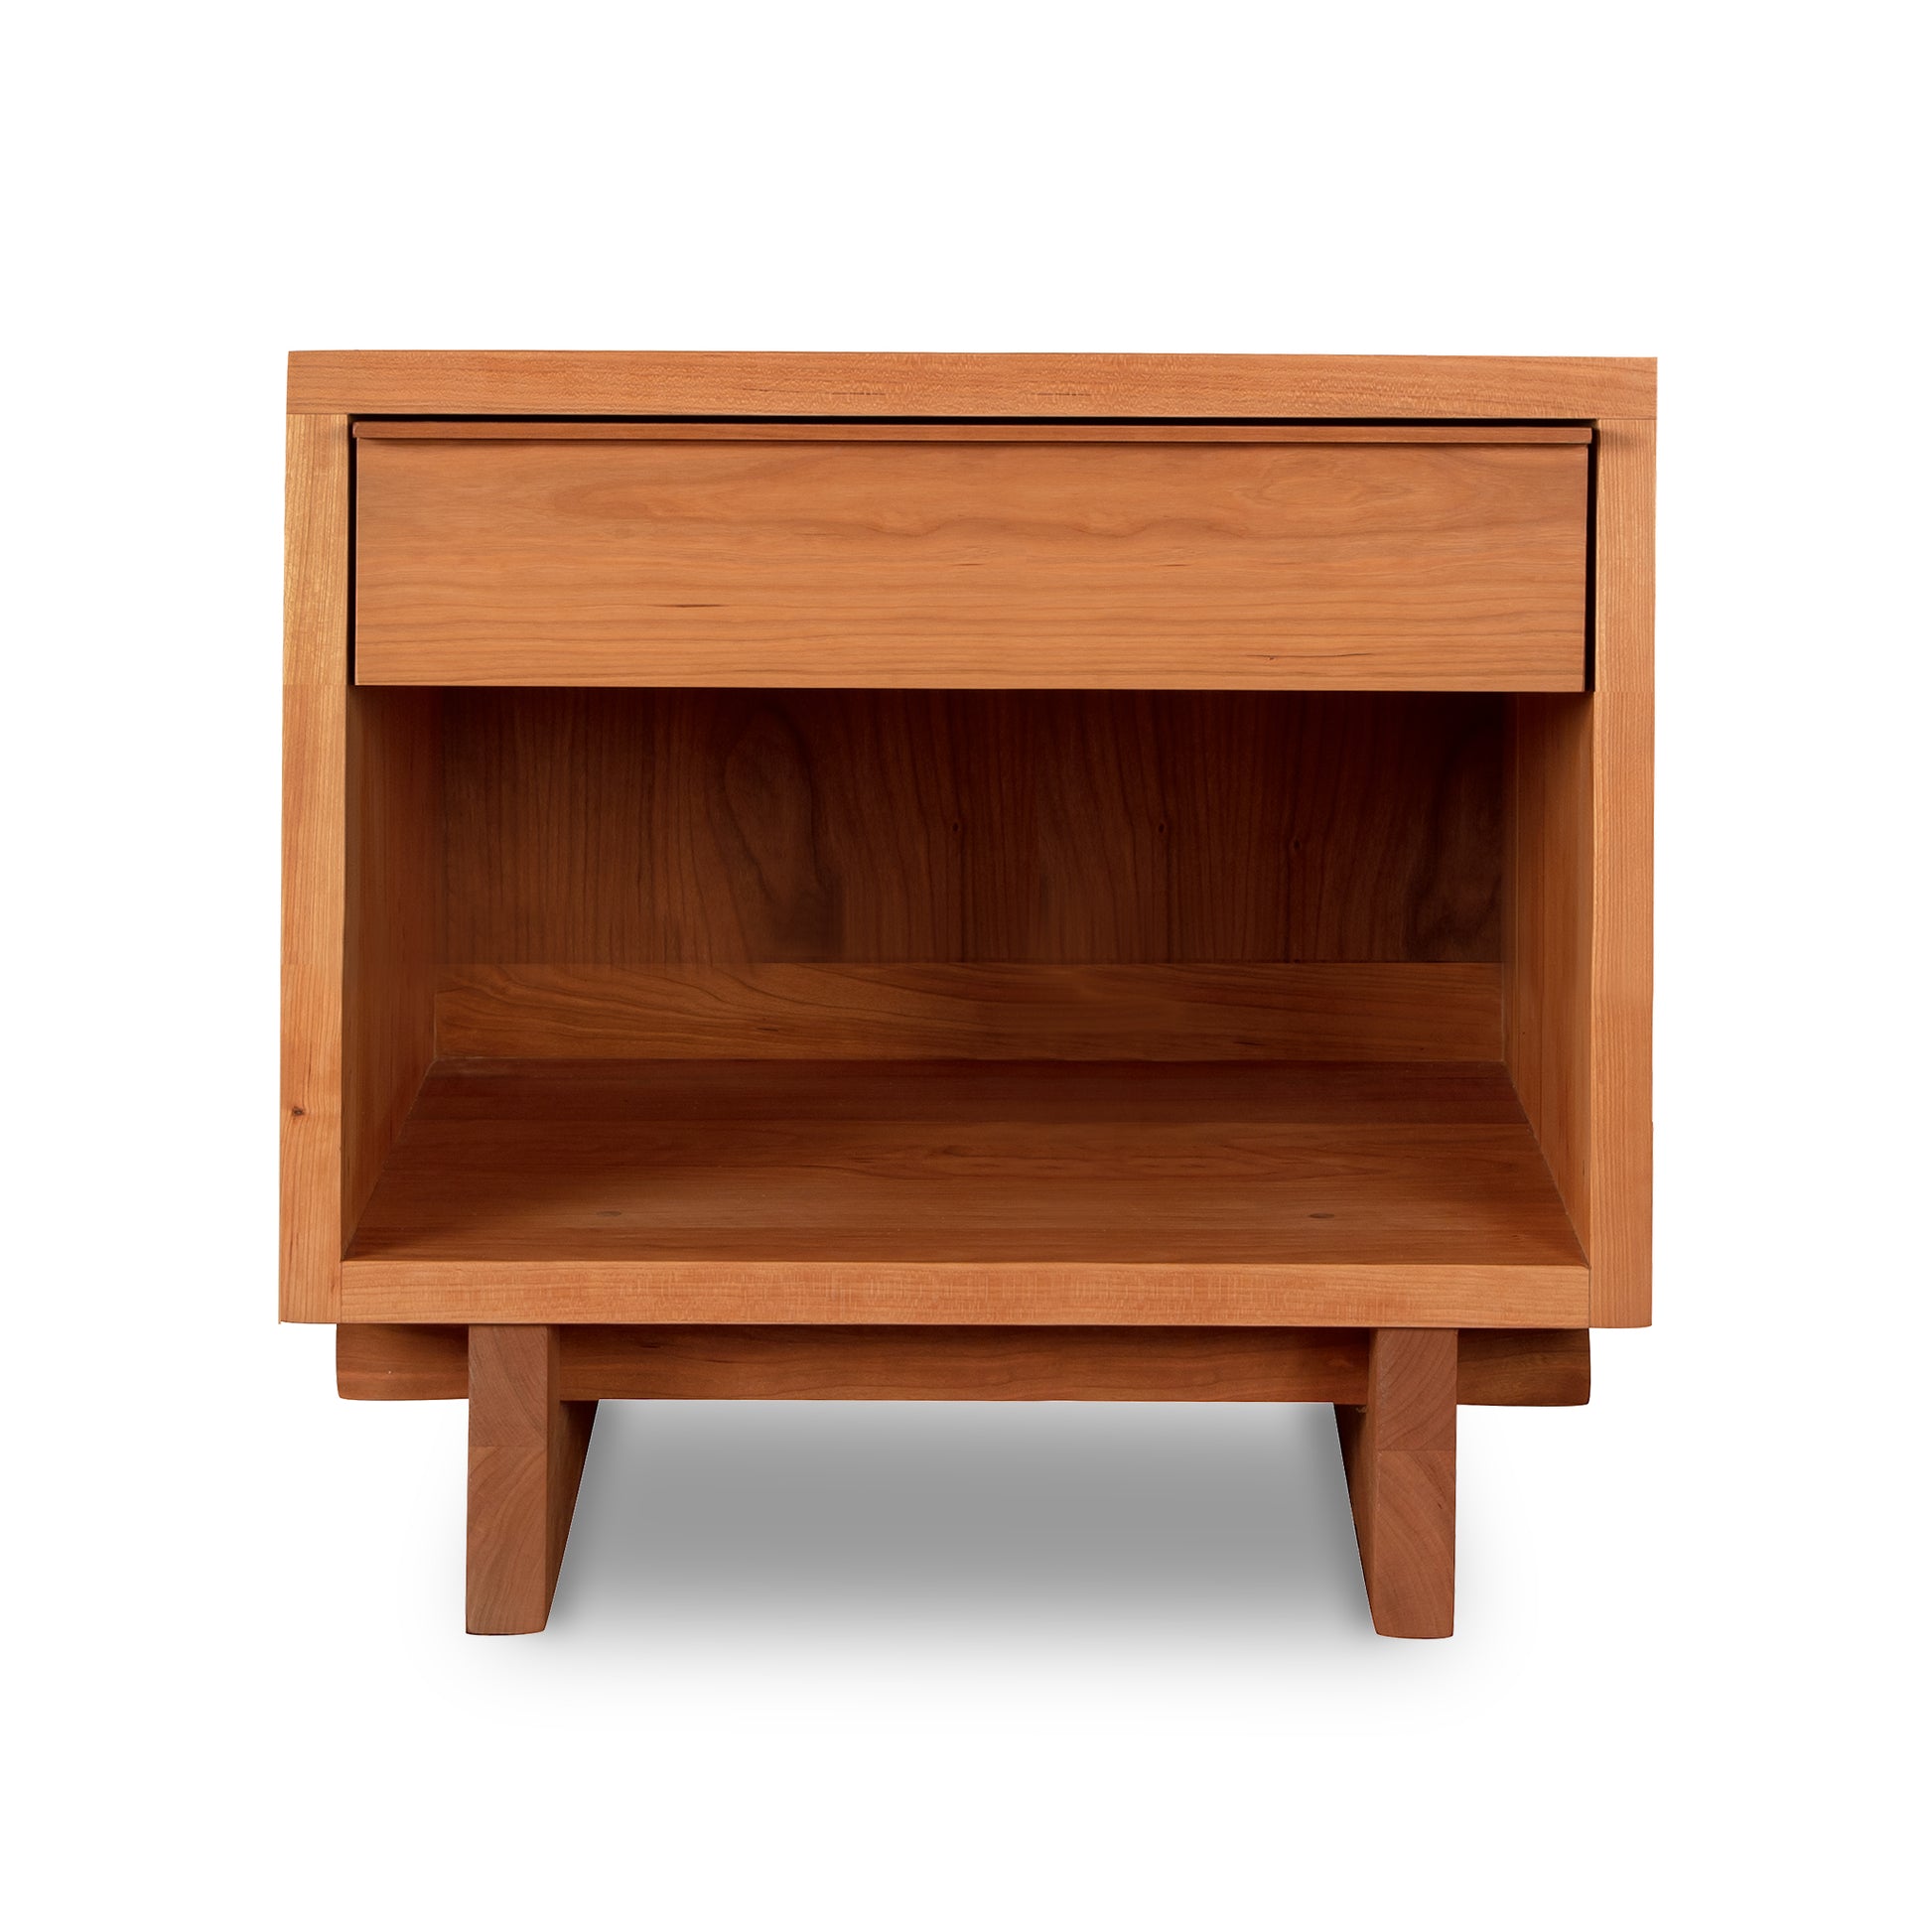 A Vermont Furniture Designs Kipling 1-Drawer Enclosed Shelf Wide Nightstand, isolated on a white background.